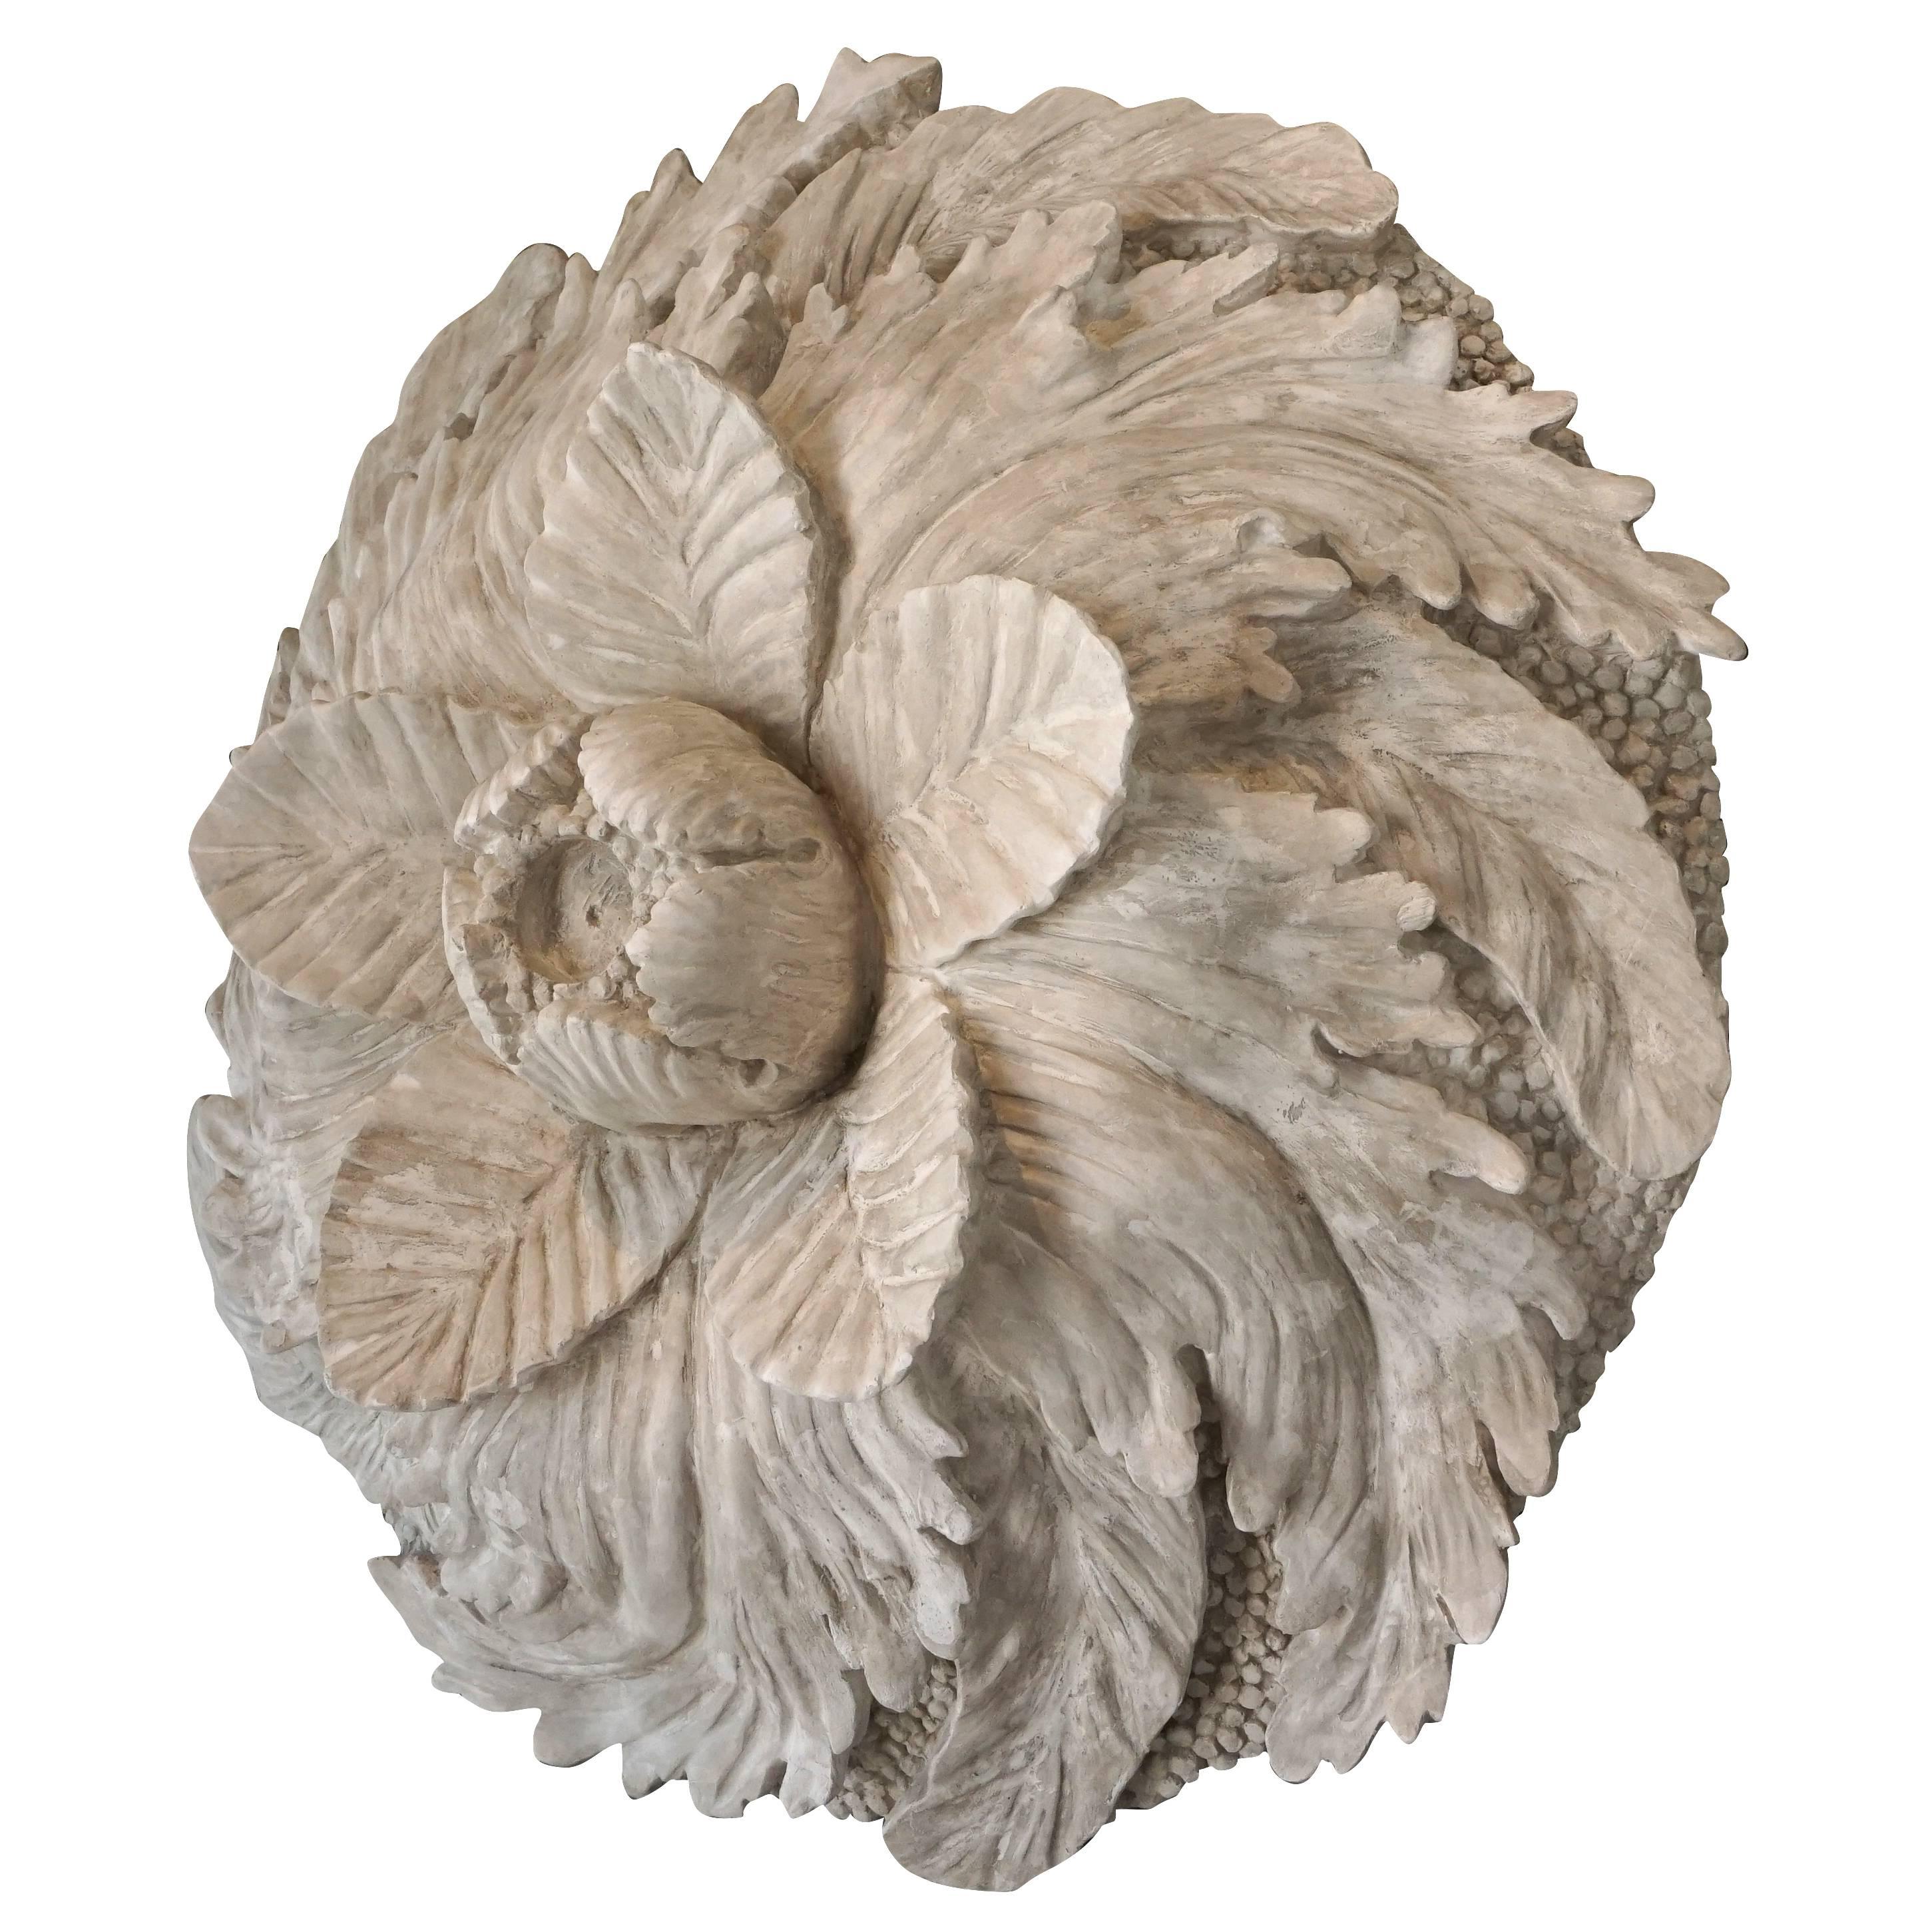 Wall mount large architectural element of a over sized rosette with details of the petals and a raised center, in French plaster.